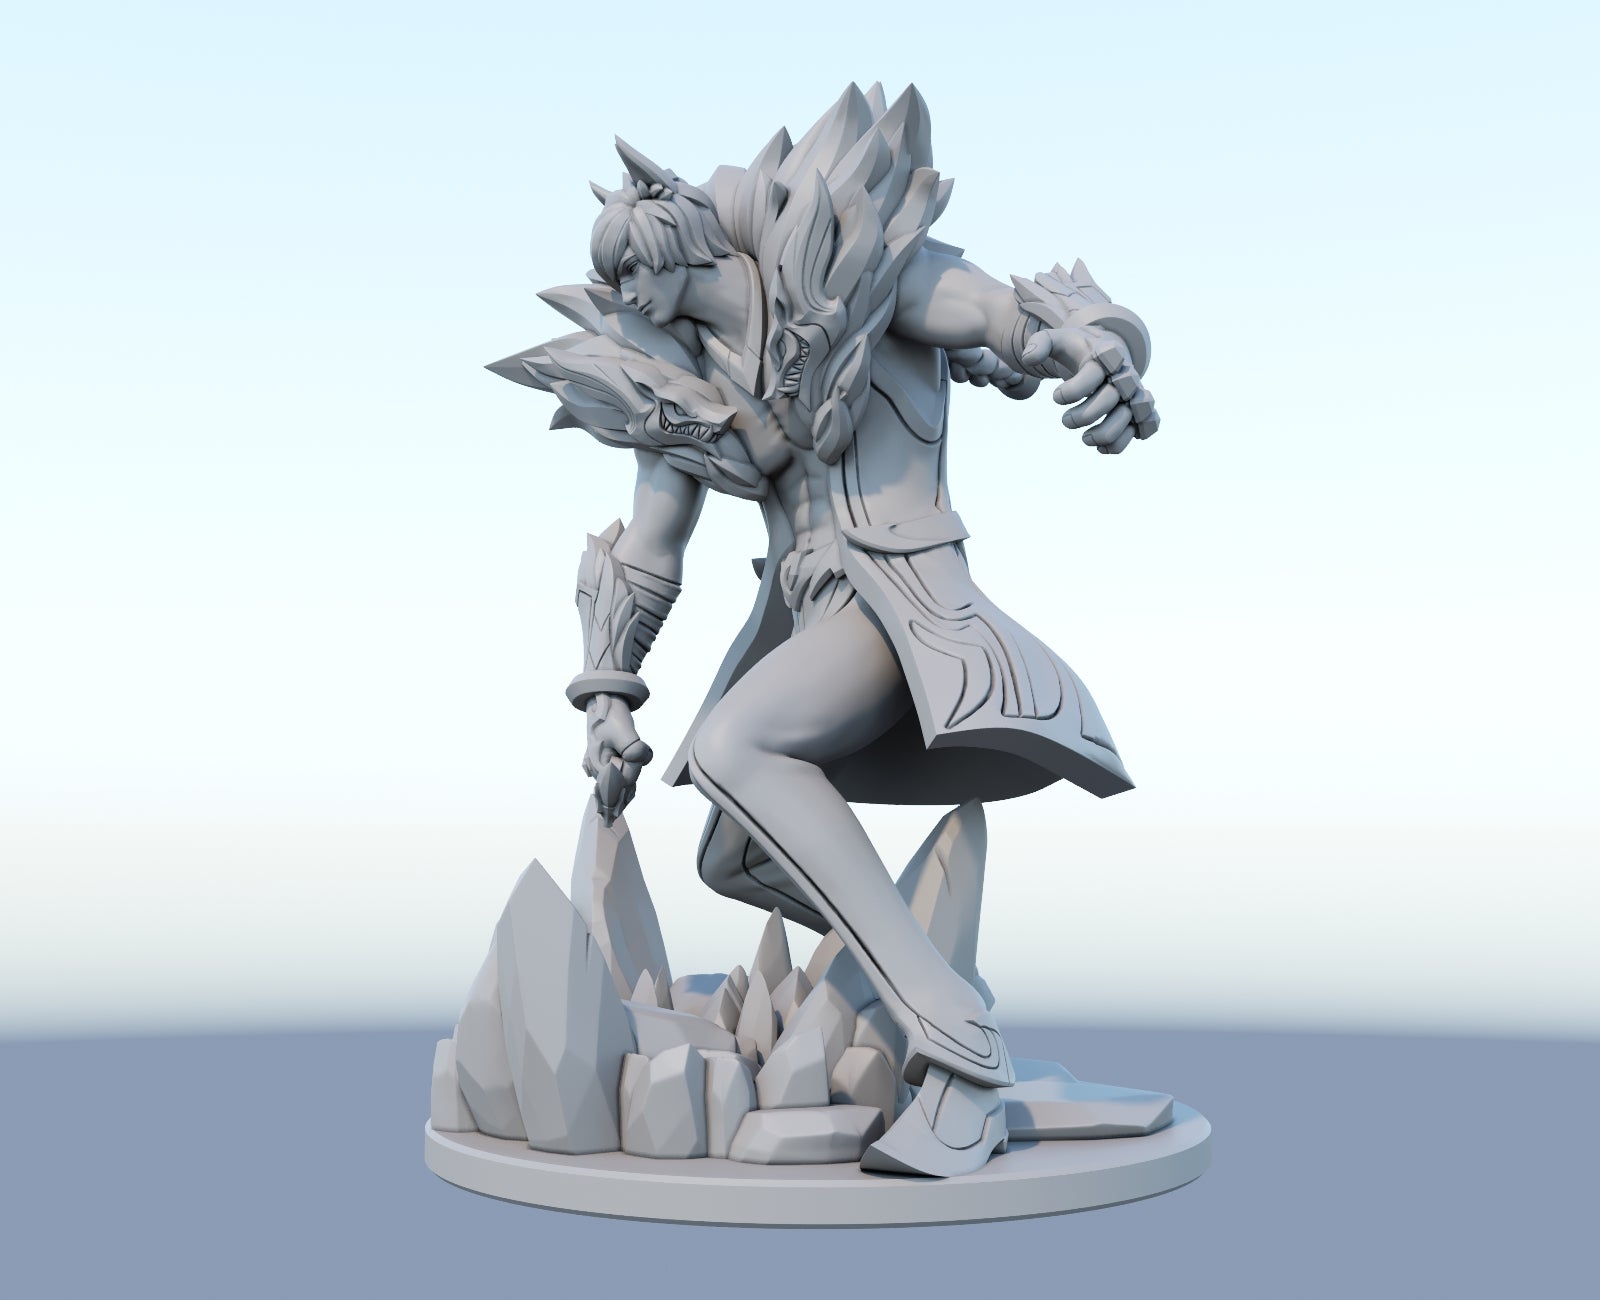 Sett 3D-printed League of Legends champion figure. Decorate your gaming setup or home with your favorite League of Legends champion! Choose between the unpainted version, perfect for you to paint yourself, or the hand-painted version by a professional painter. Order your figure today!